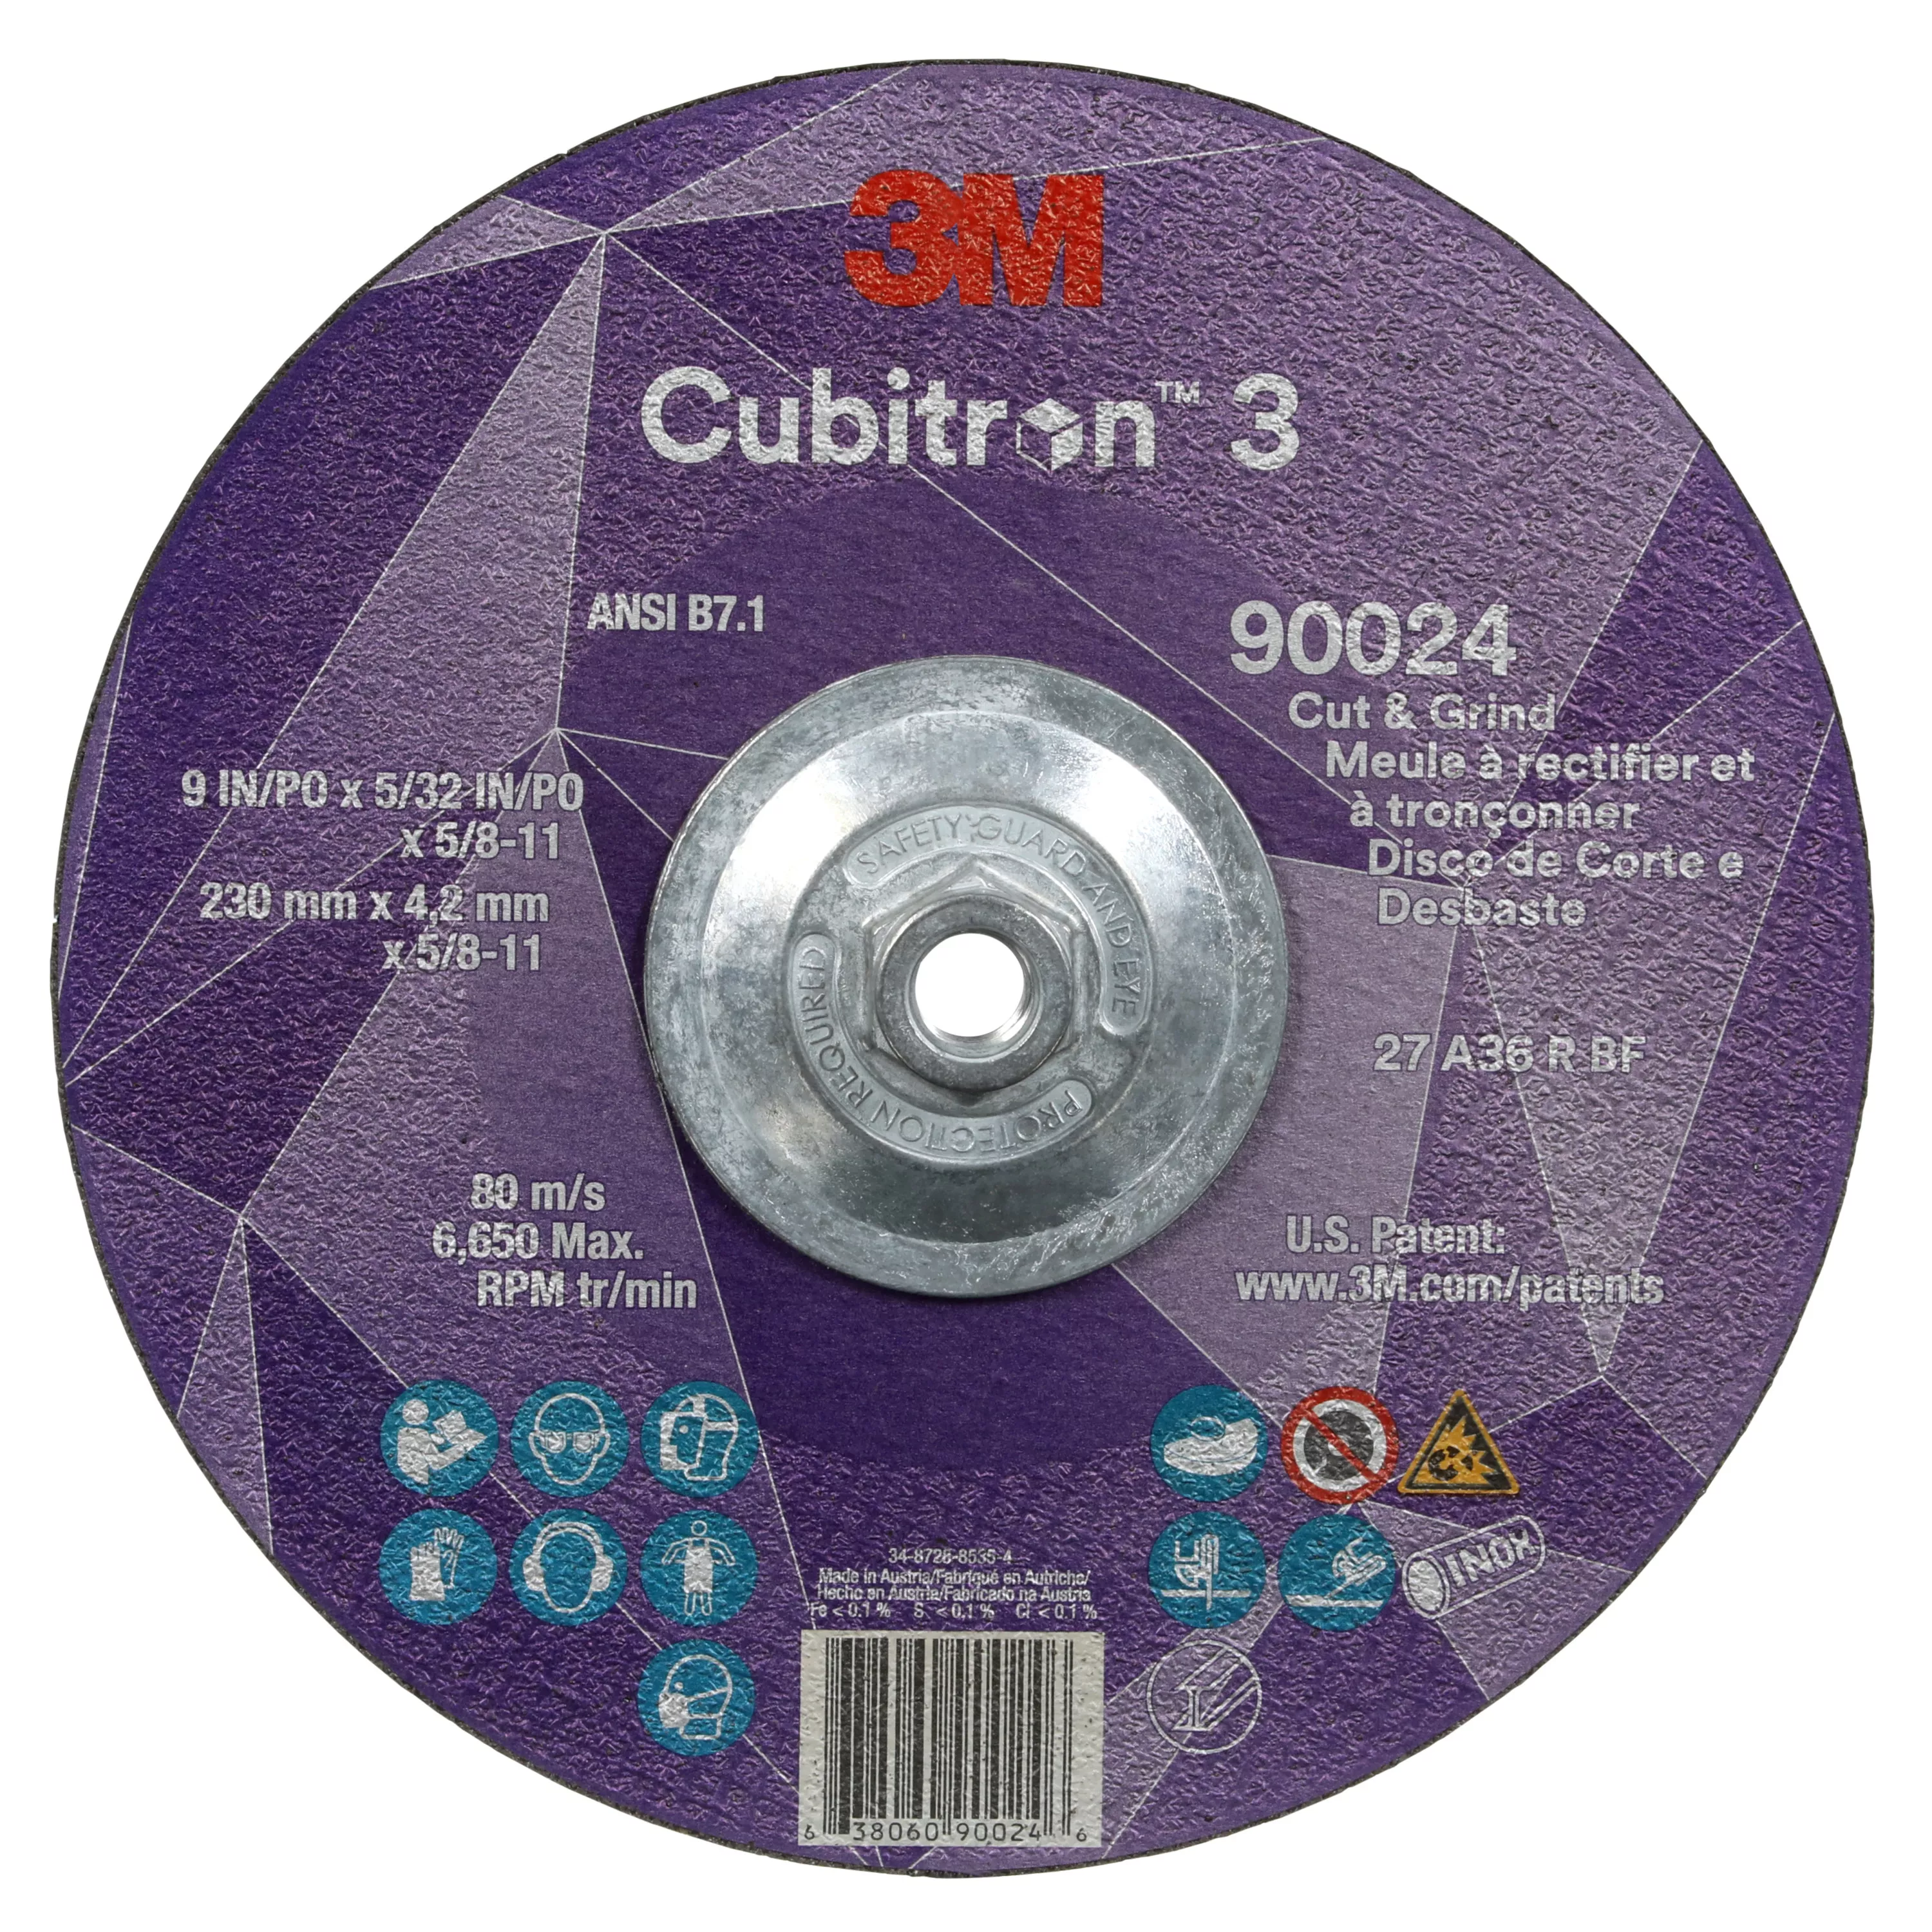 3M™ Cubitron™ 3 Cut and Grind Wheel, 90024, 36+, T27, 9 in x 5/32 in x
5/8 in-11 (230 x 4.2 mm x 5/8-11 in), ANSI, 10 ea/Case